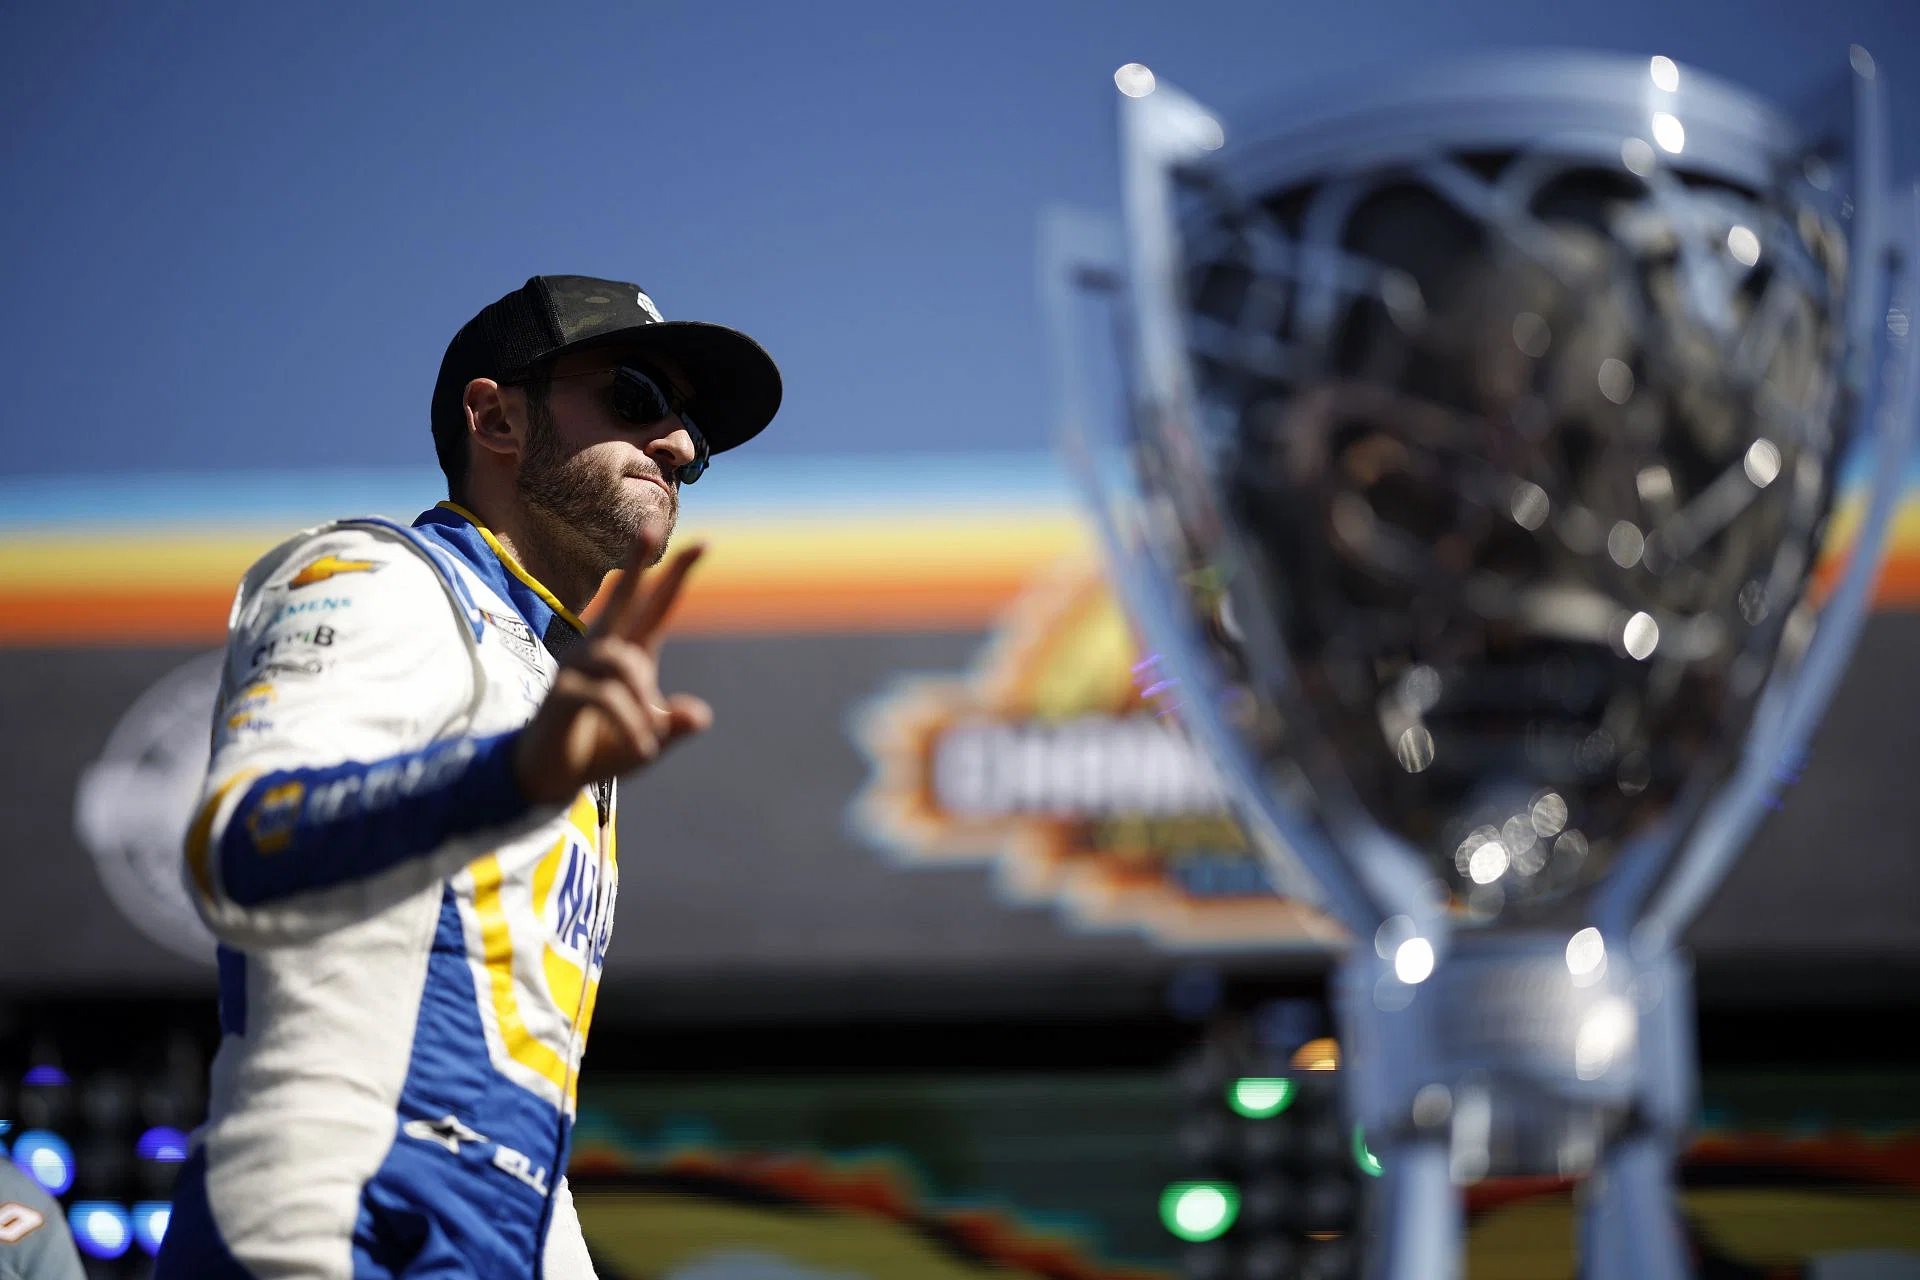 Inspiredlovers c3abd-17061121202653-1920 The List of NASCAR Cup Series Chase Elliott has Won in his career Sports  Chase Elliott 